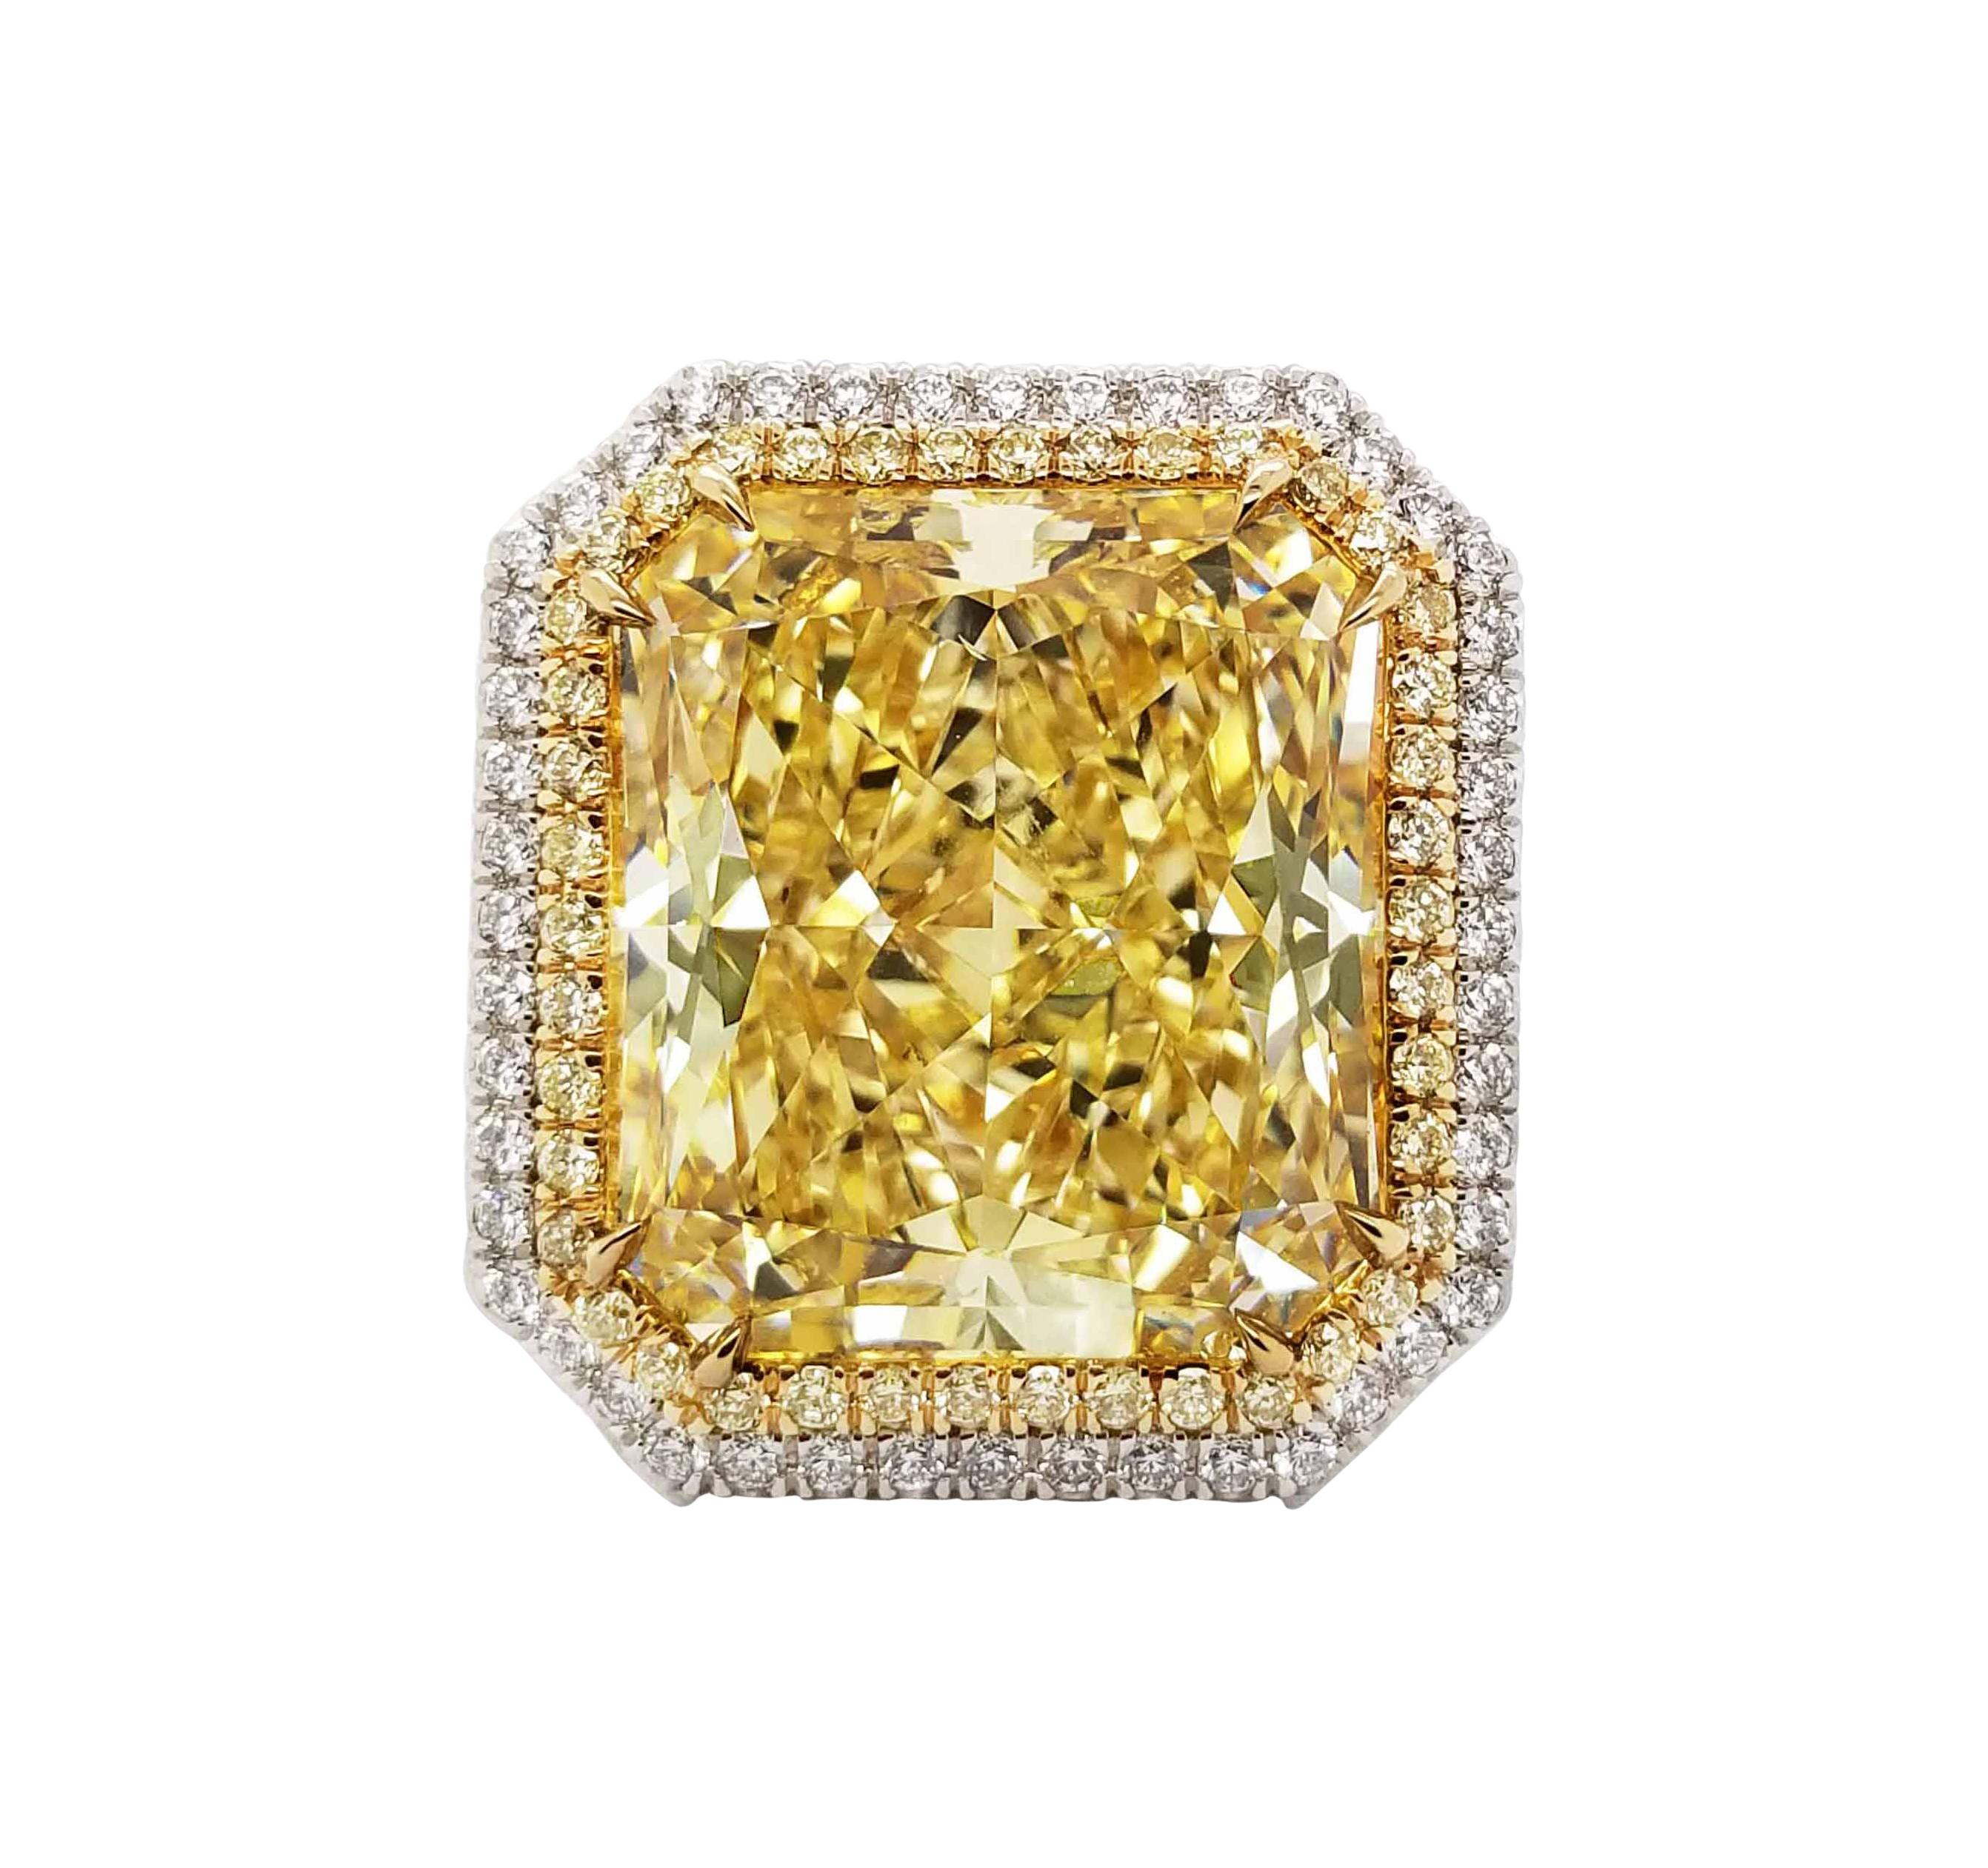 SCARSELLI 24 Carat Fancy Yellow Diamond Ring in Platinum GIA For Sale